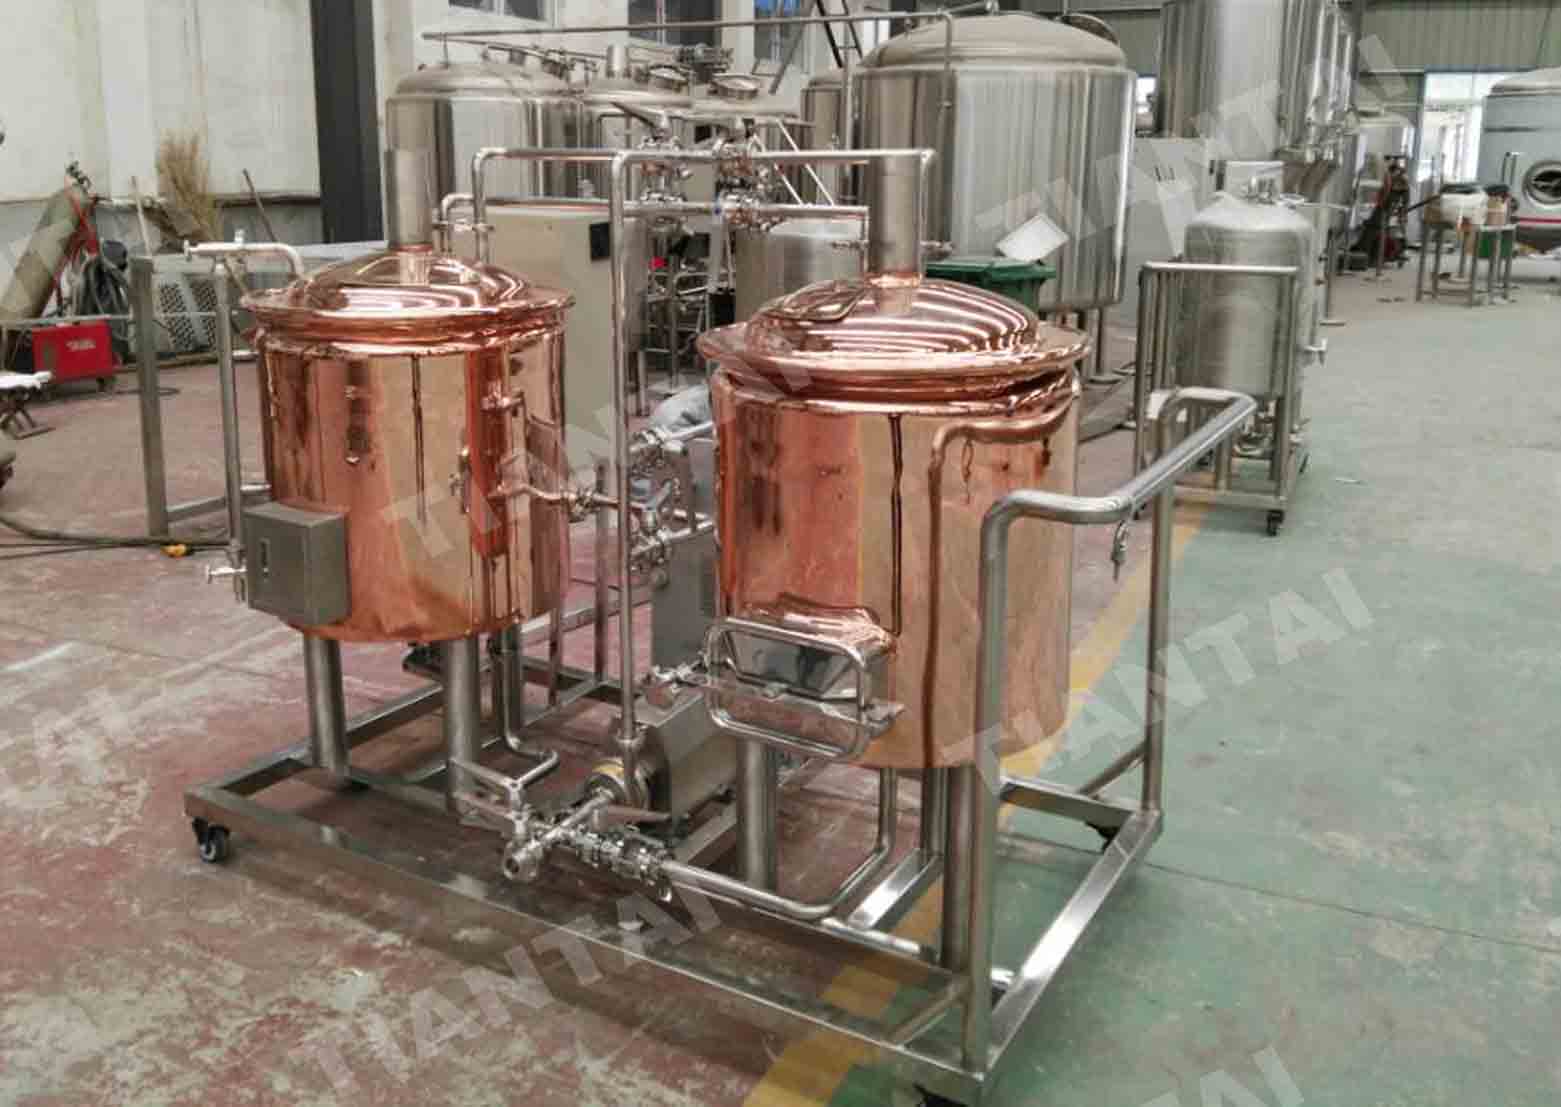 Small batch luxury red copper beer brewing tanks before delivery